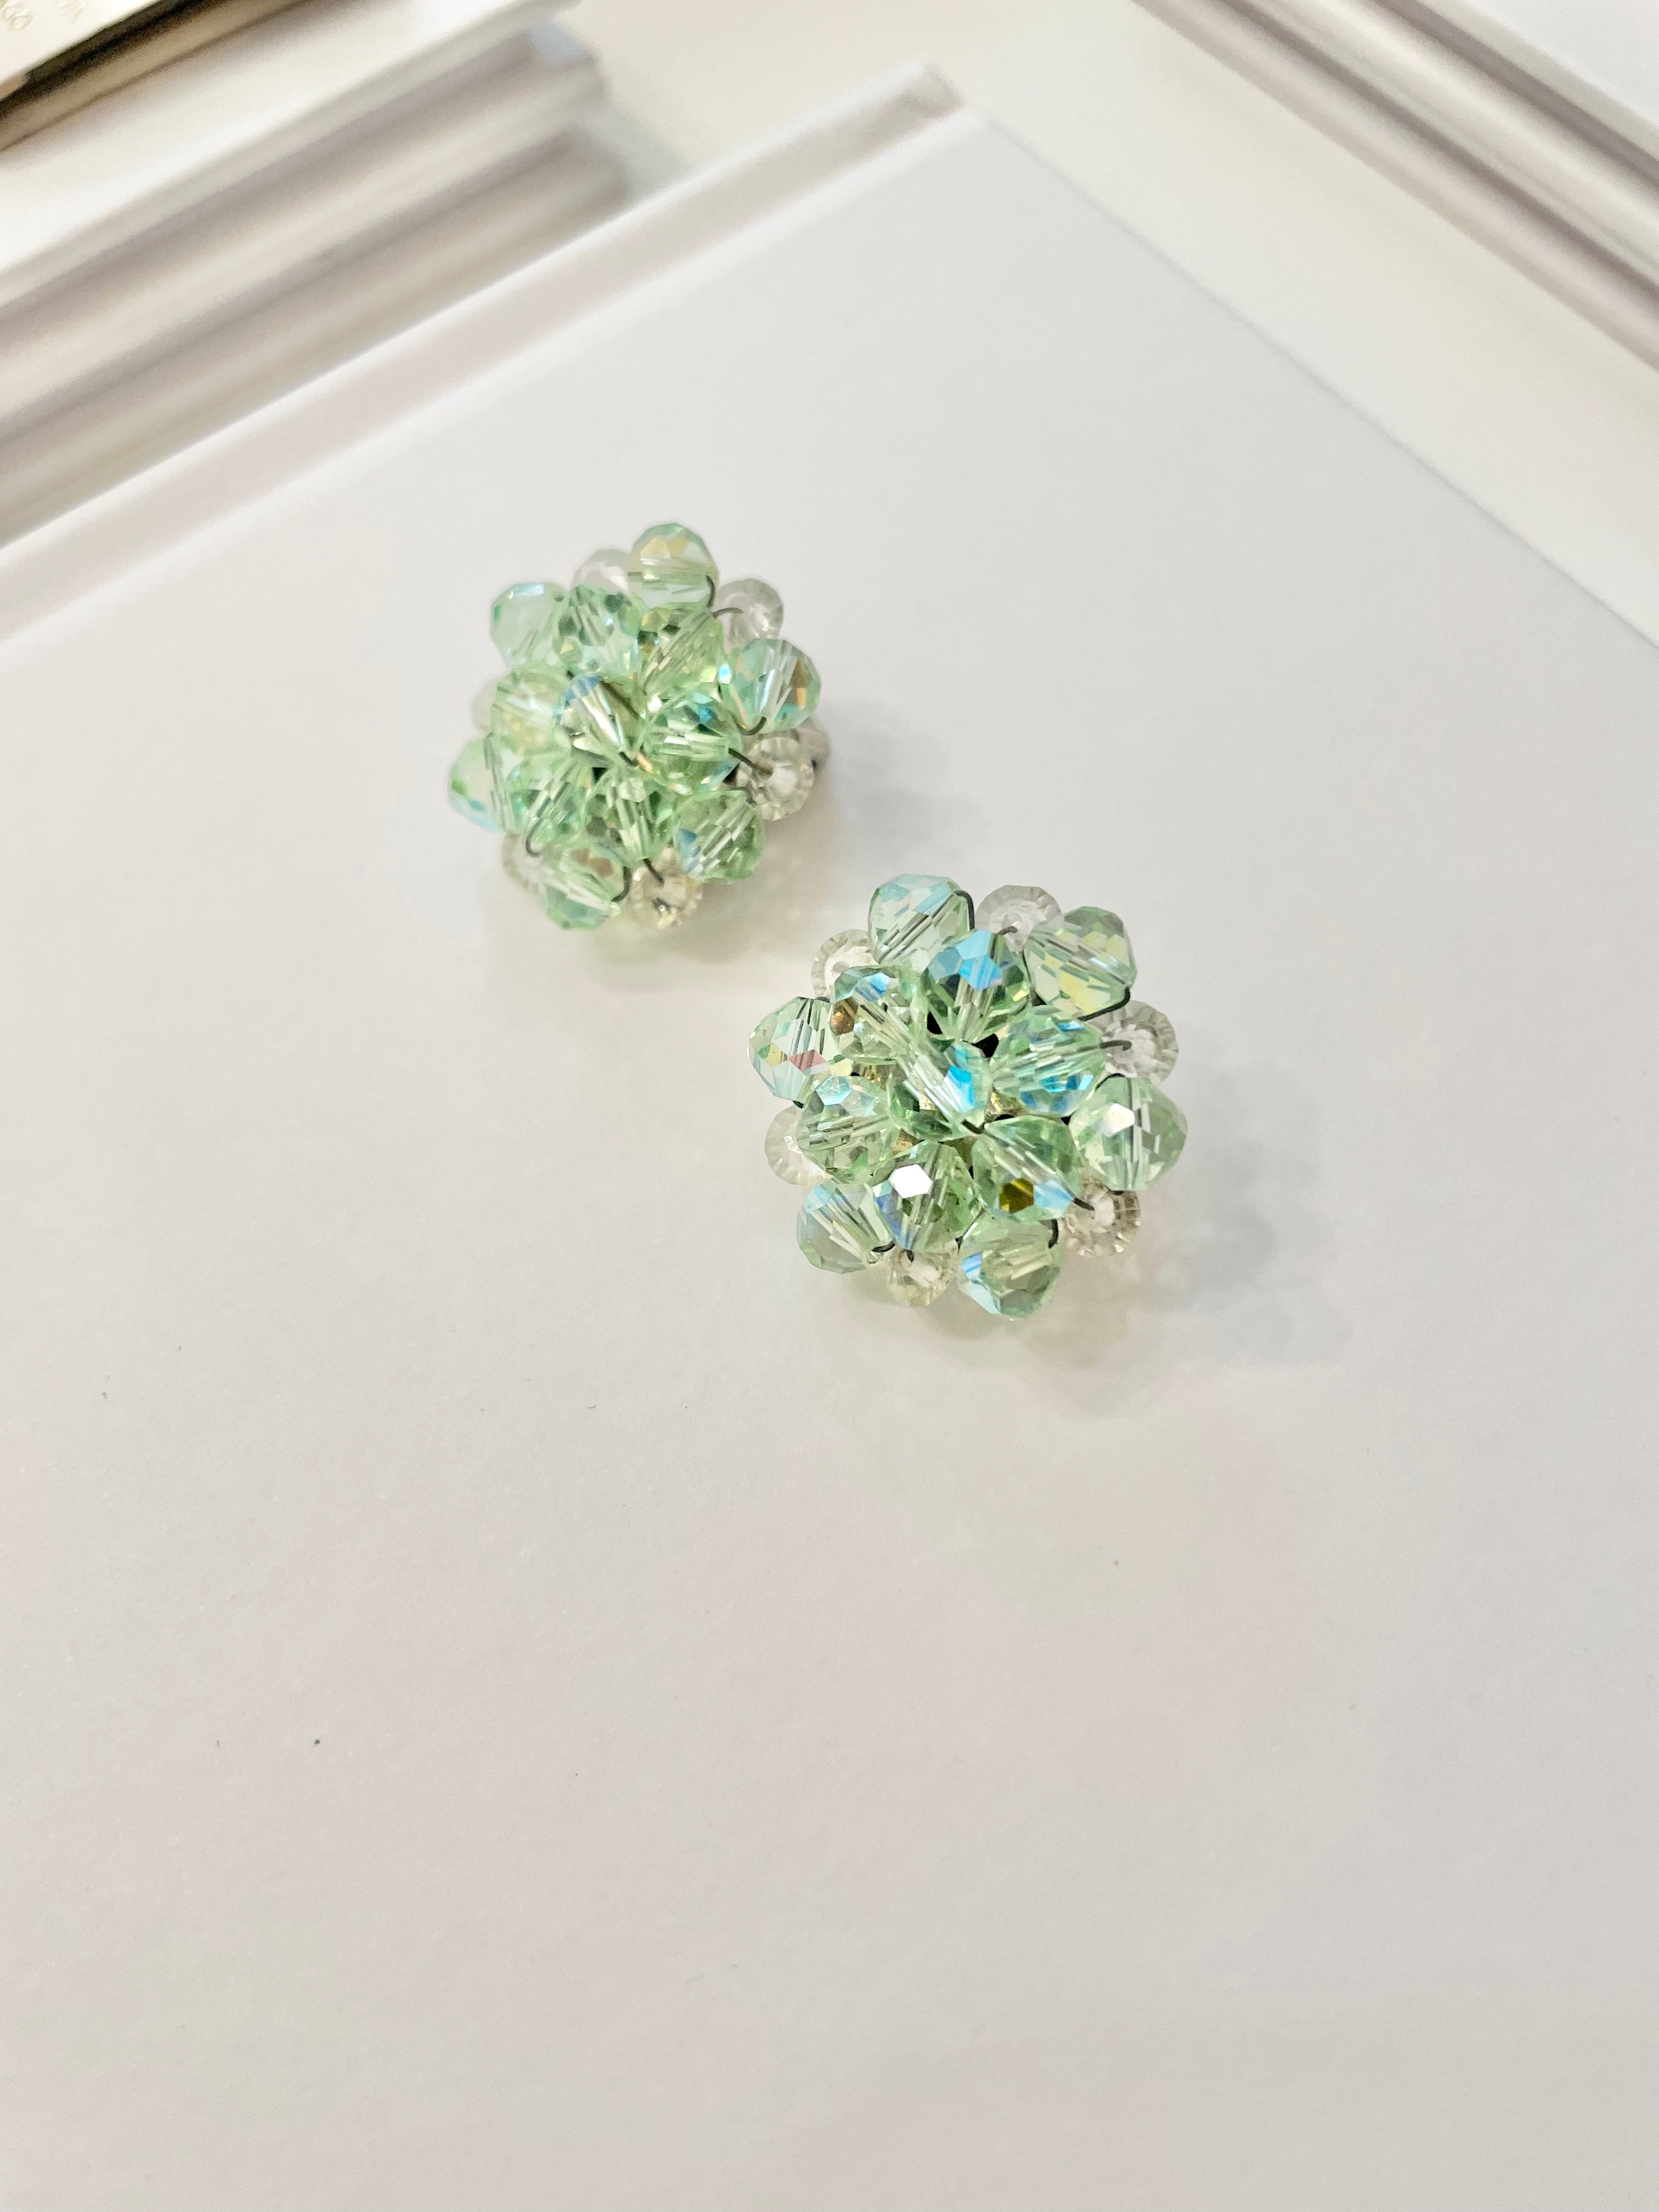 1960's soft minty green Austrian crystal button earrings... so feminine, and timeless!